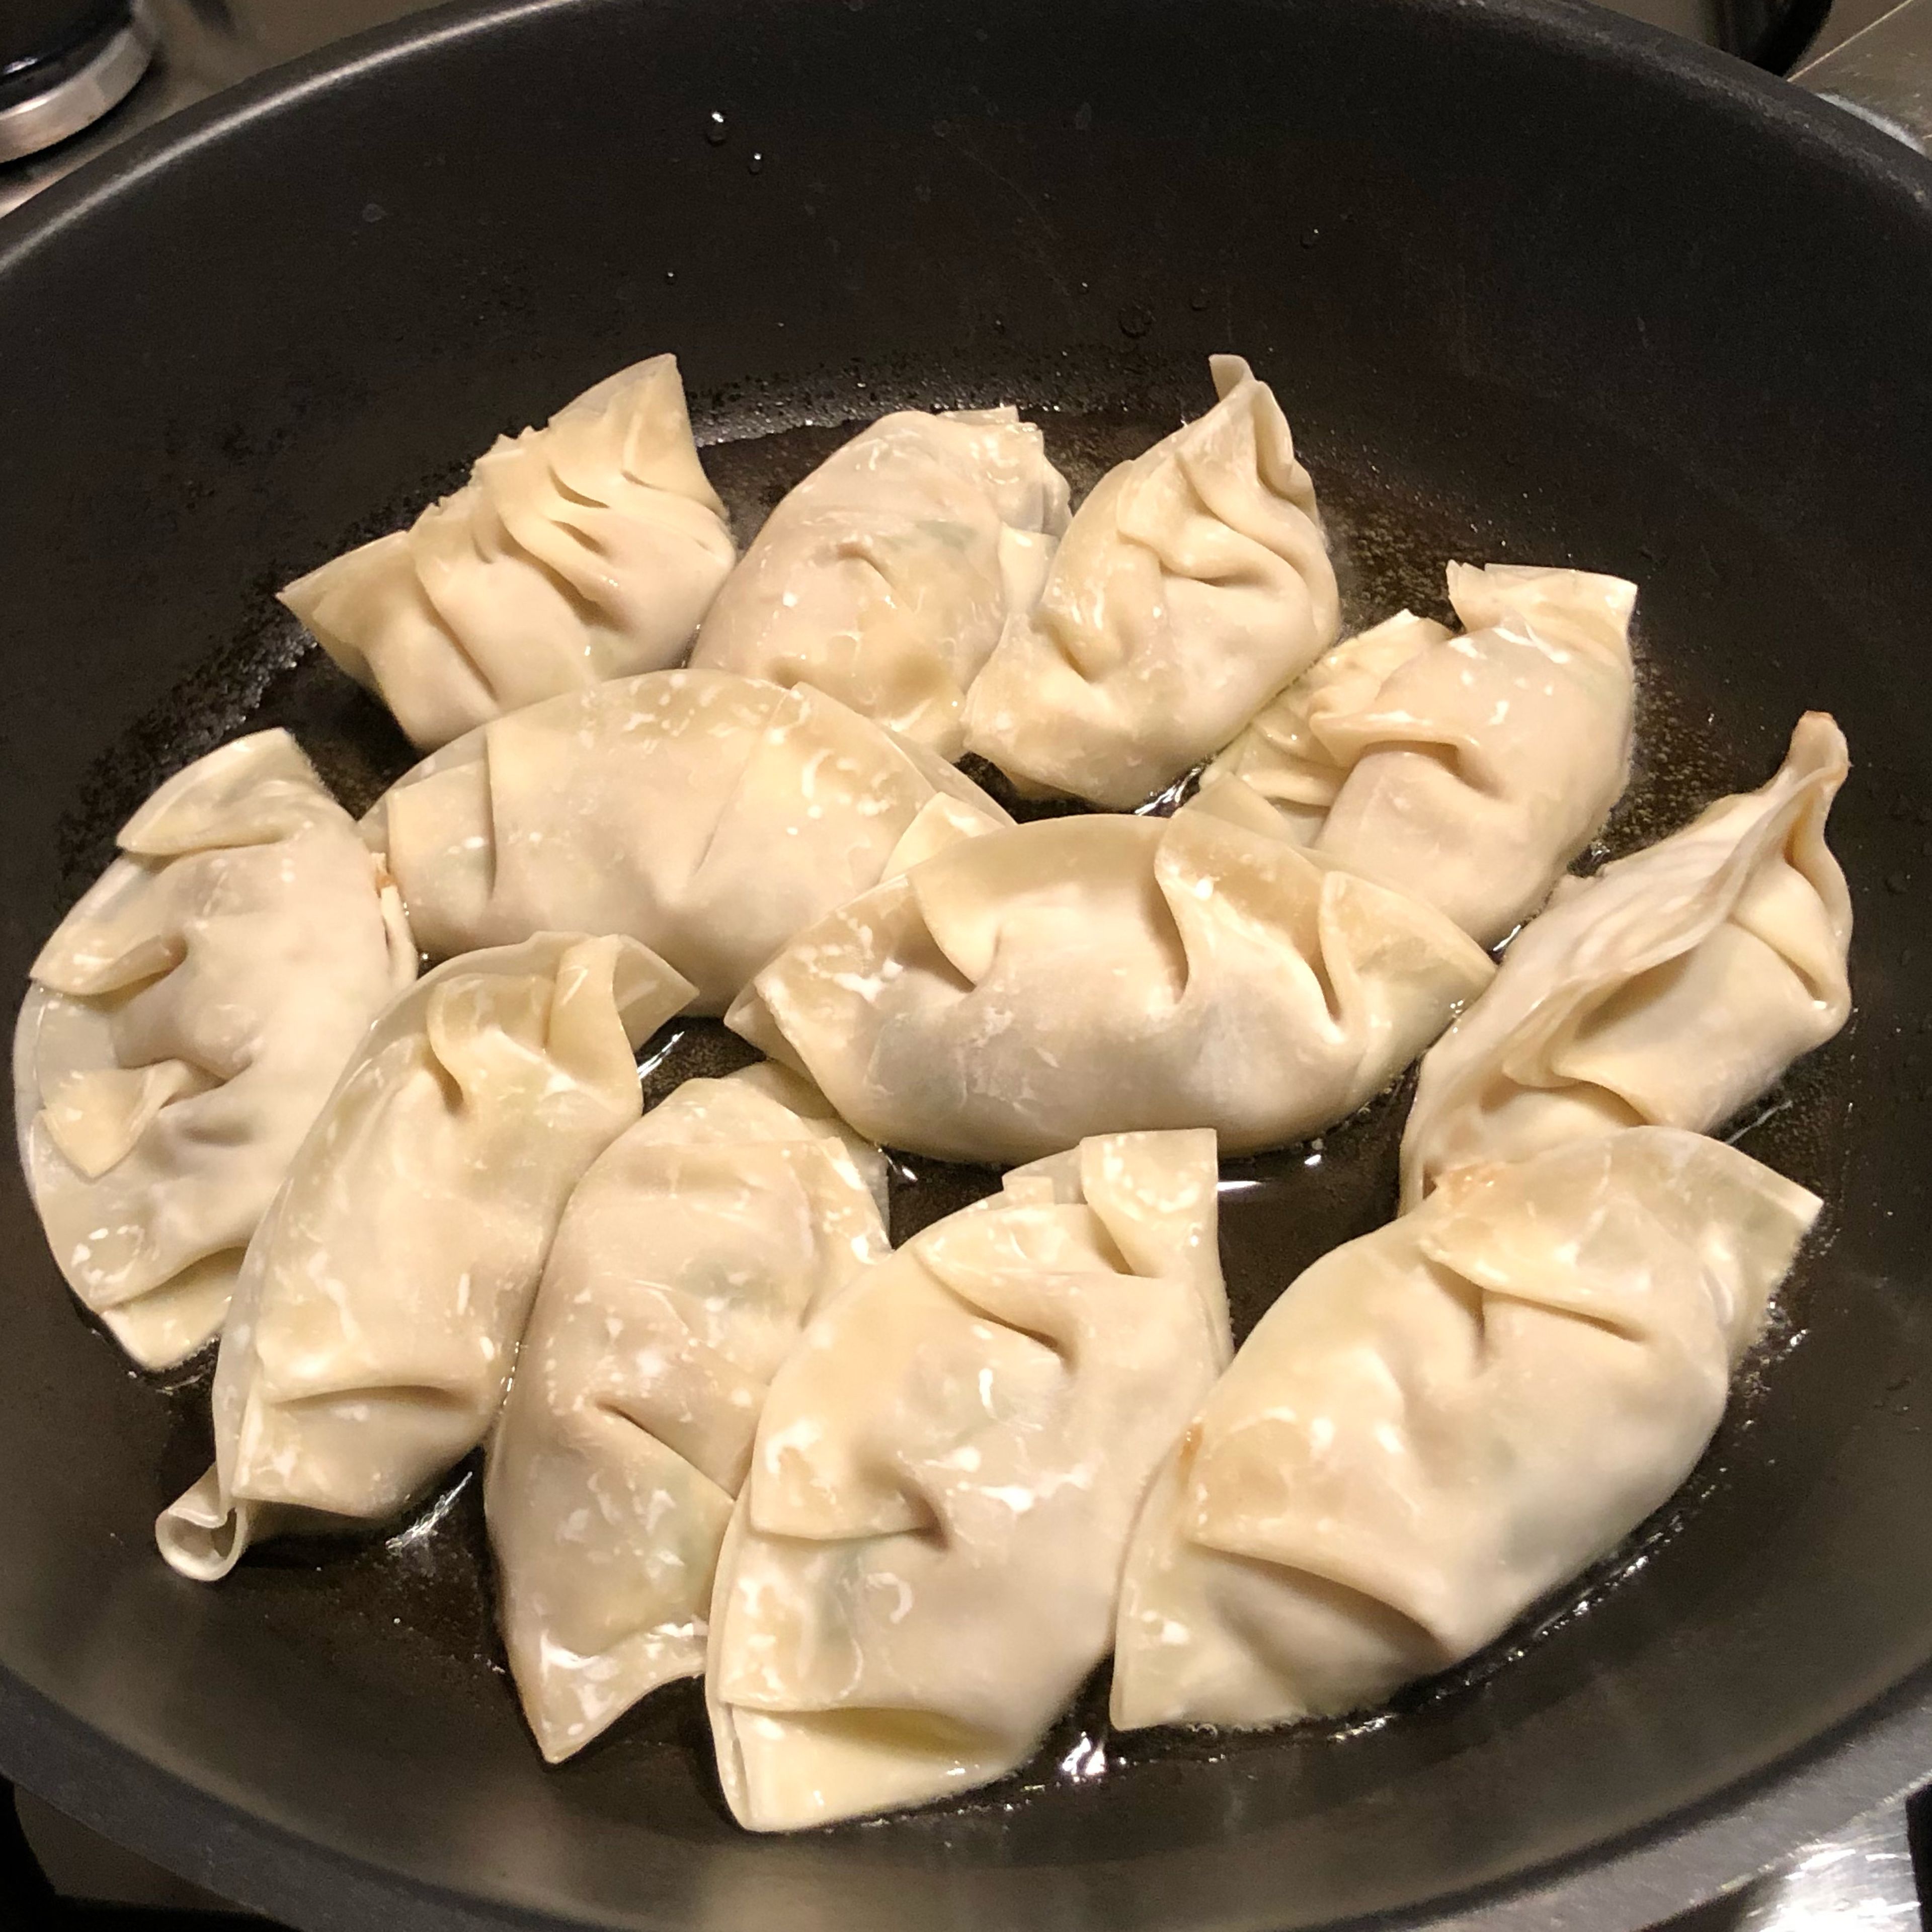 The gyoza are first fried on their flat side until the bottom is nice and brown. Then, water is added and the pan sealed with a lid until the upper part of the gyoza is steamed. You know the gyoza is done when all the water is gone.